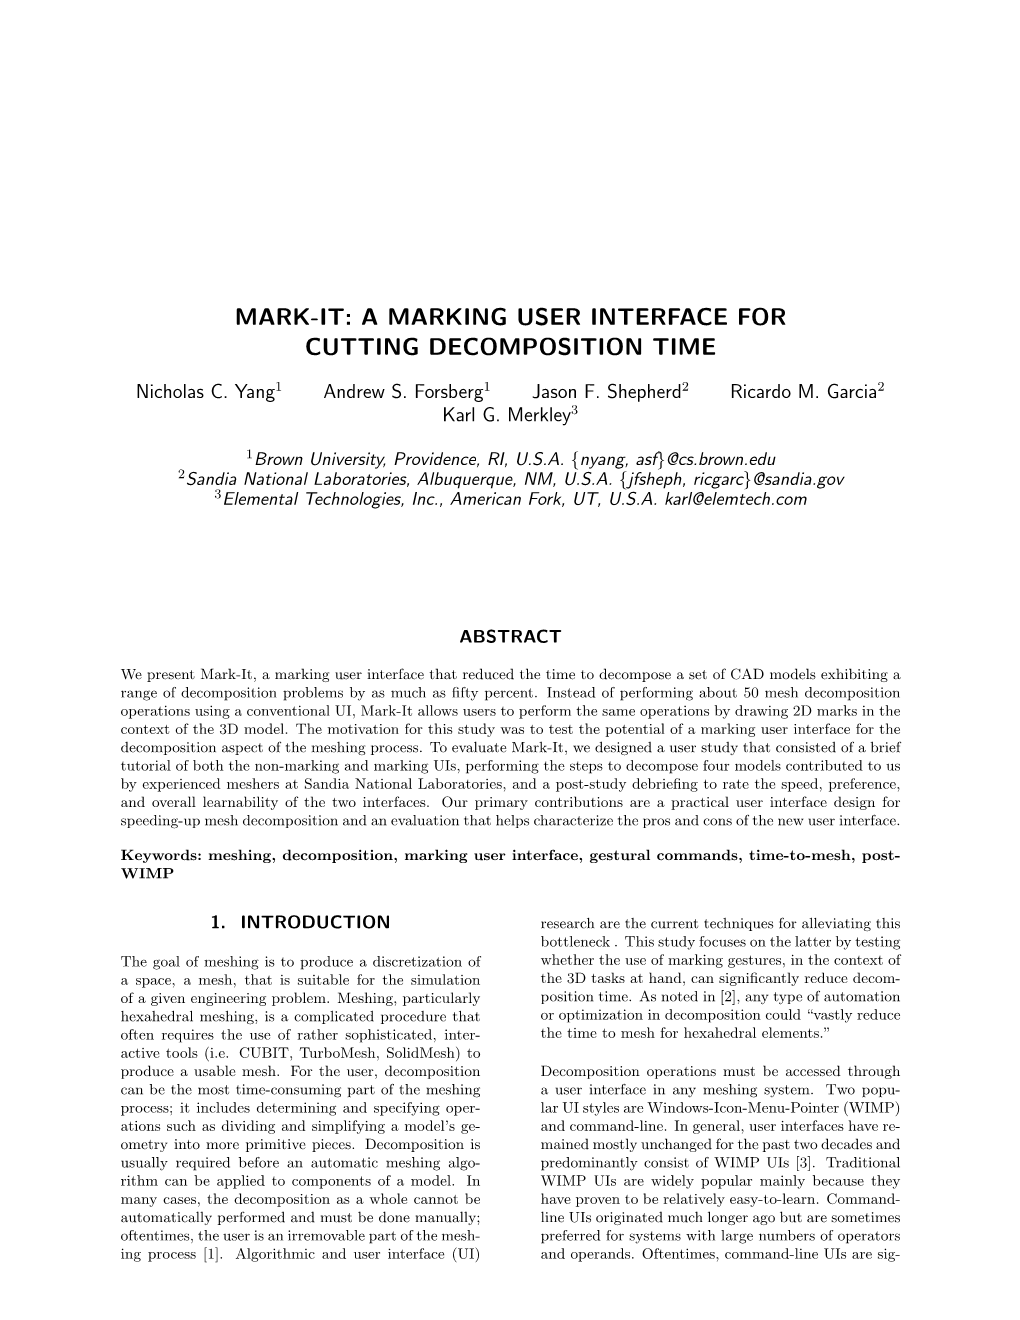 A Marking User Interface for Cutting Decomposition Time